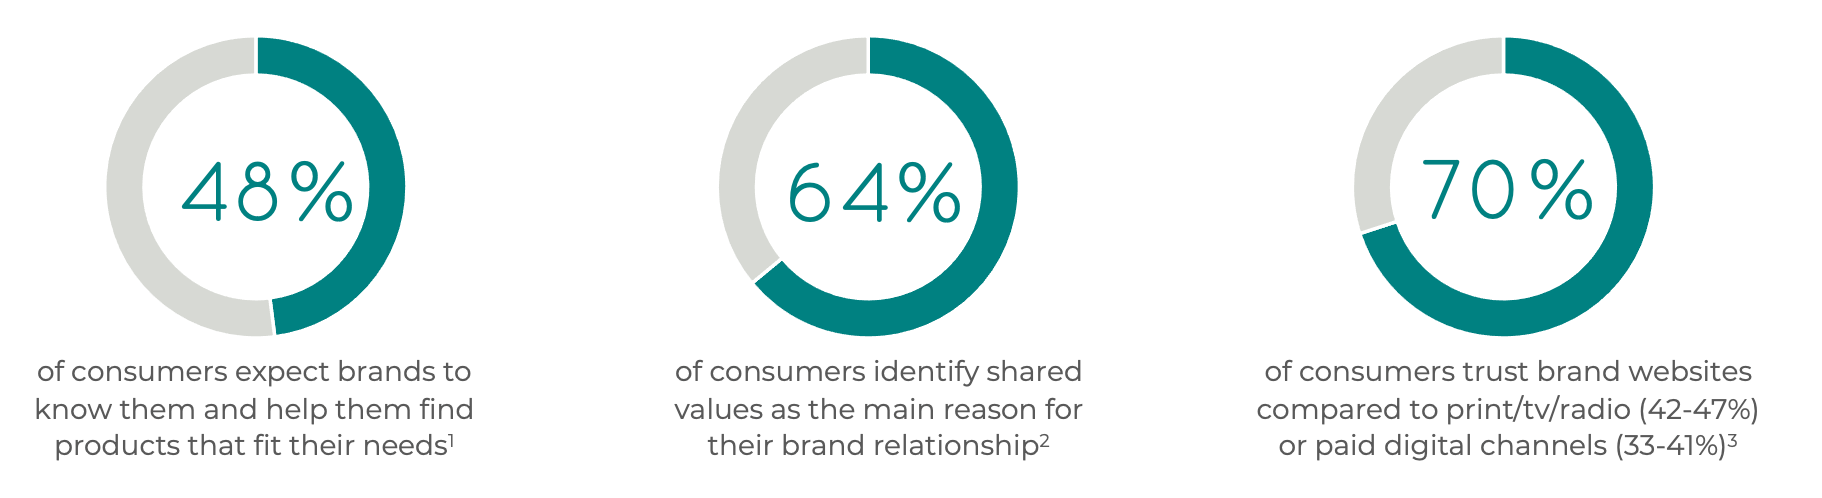 3 donut graphs showing that 48% of consumers expect brands to know them, 64% of consumers say shared values is important, and 70% of consumers trust brand websites over print/TV/radio